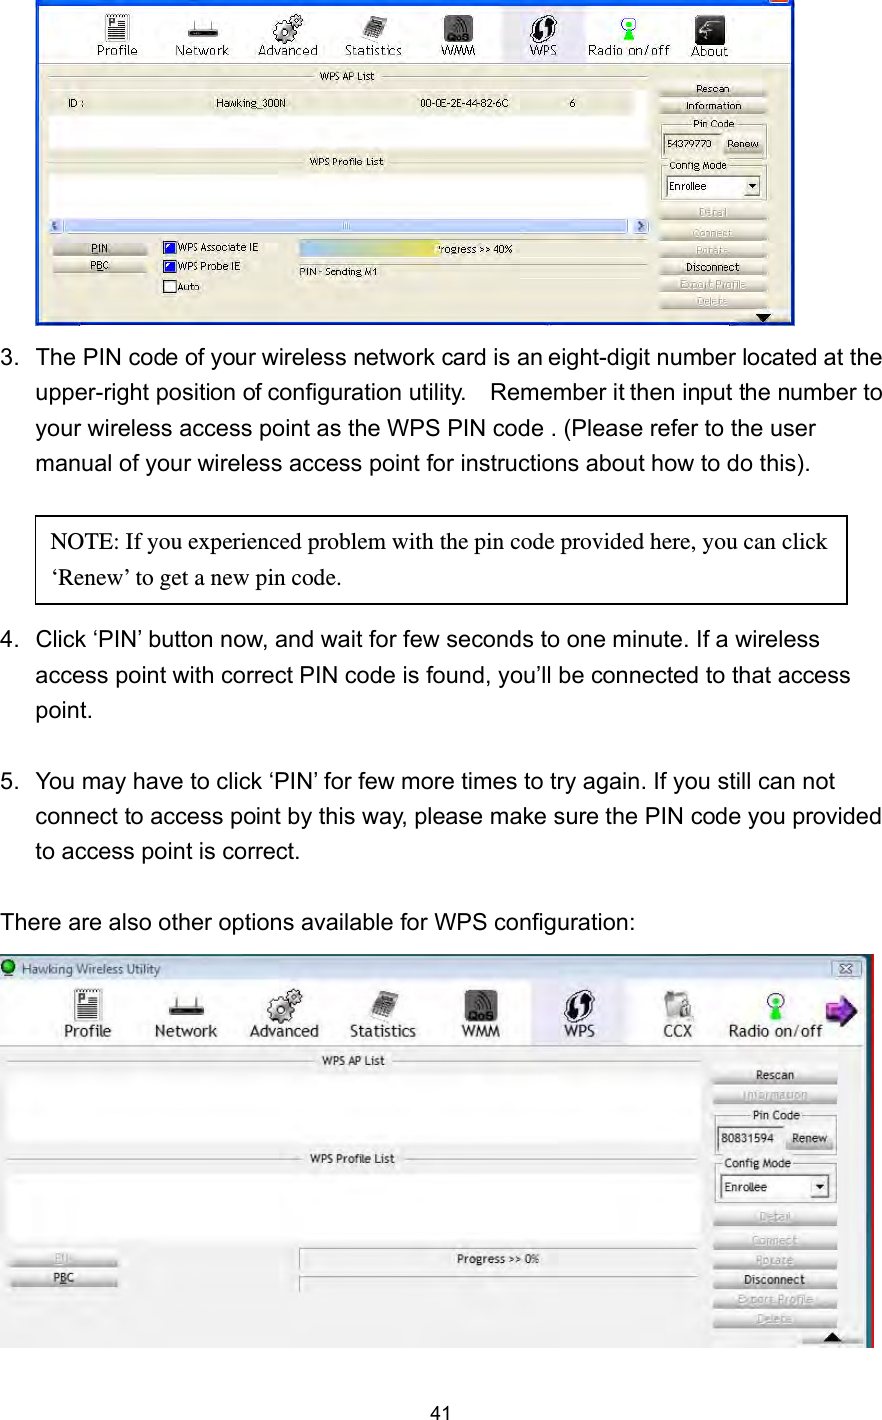  41  3.  The PIN code of your wireless network card is an eight-digit number located at the upper-right position of configuration utility.    Remember it then input the number to your wireless access point as the WPS PIN code . (Please refer to the user manual of your wireless access point for instructions about how to do this).     4.  Click ‘PIN’ button now, and wait for few seconds to one minute. If a wireless access point with correct PIN code is found, you’ll be connected to that access point.   5.  You may have to click ‘PIN’ for few more times to try again. If you still can not connect to access point by this way, please make sure the PIN code you provided to access point is correct.  There are also other options available for WPS configuration:   NOTE: If you experienced problem with the pin code provided here, you can click ‘Renew’ to get a new pin code. 